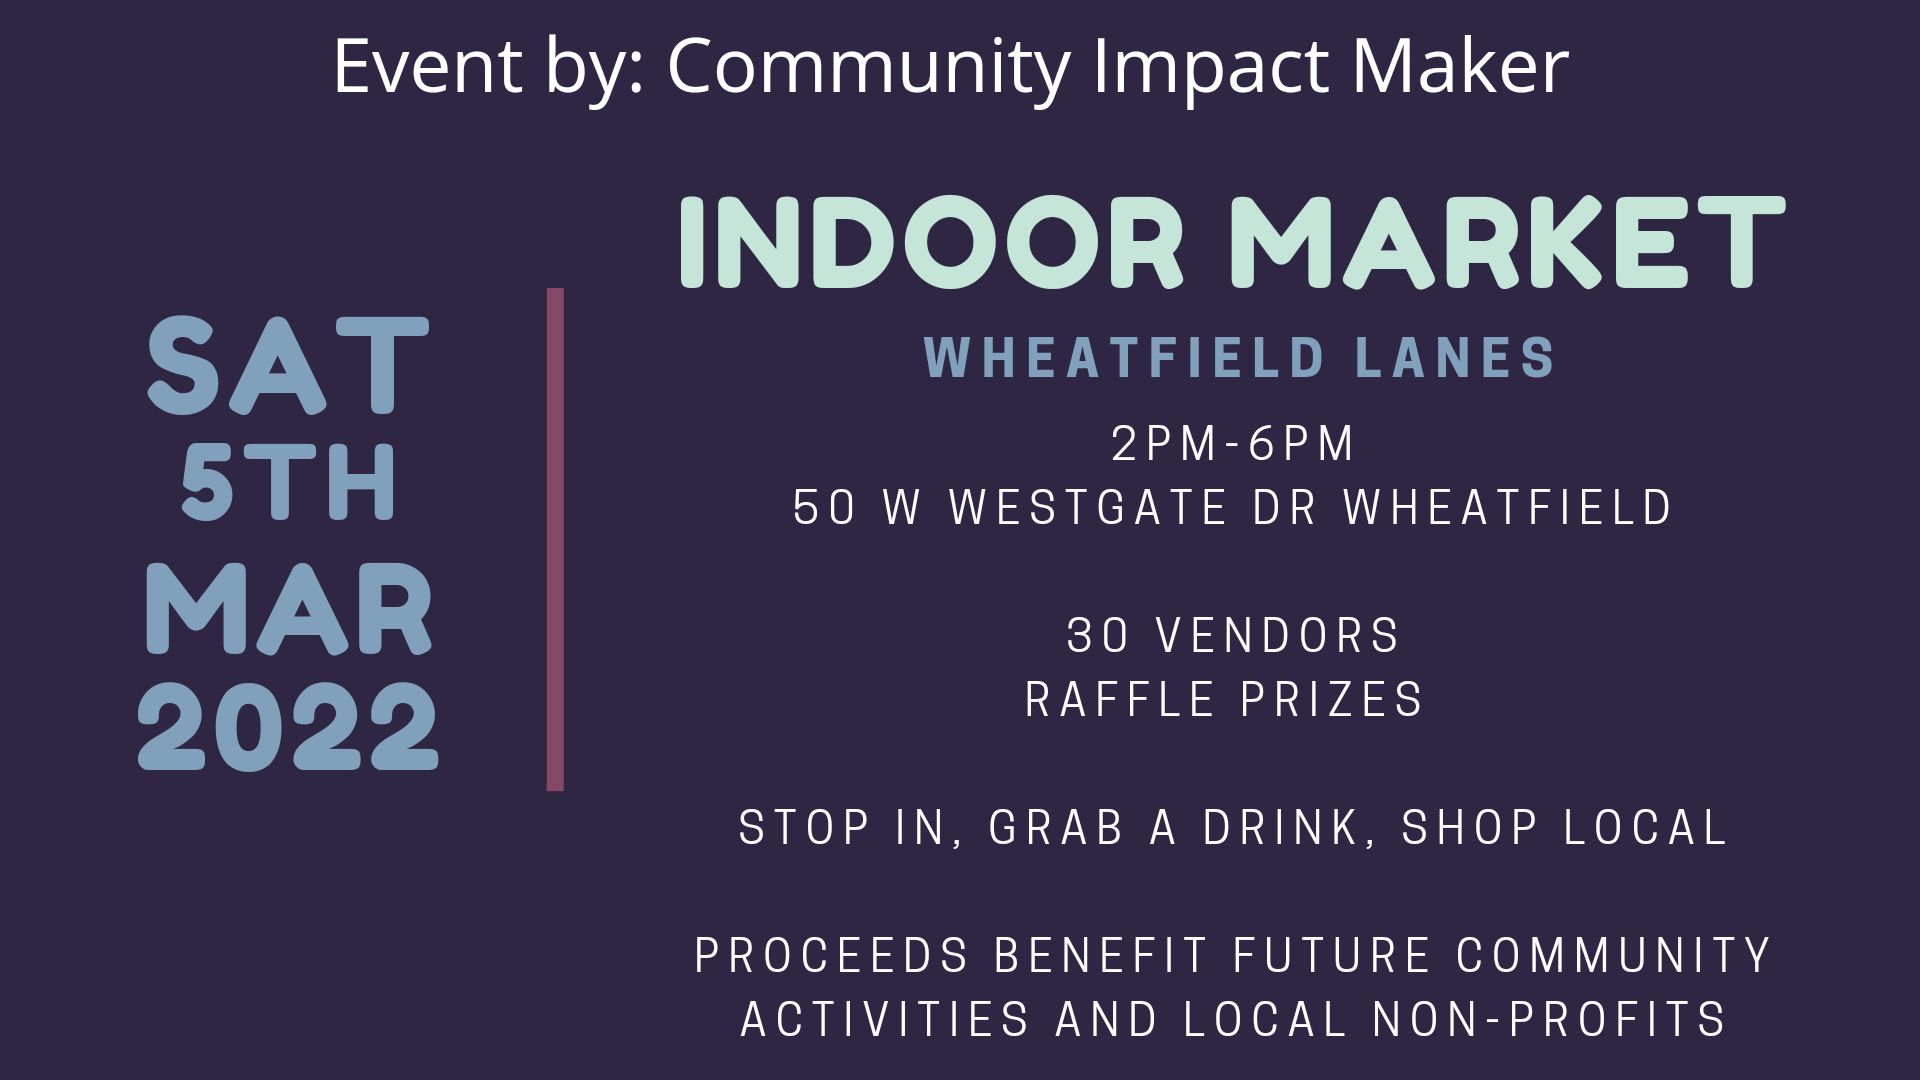 Indoor Market and Craft Fair, Wheatfield, Indiana, United States